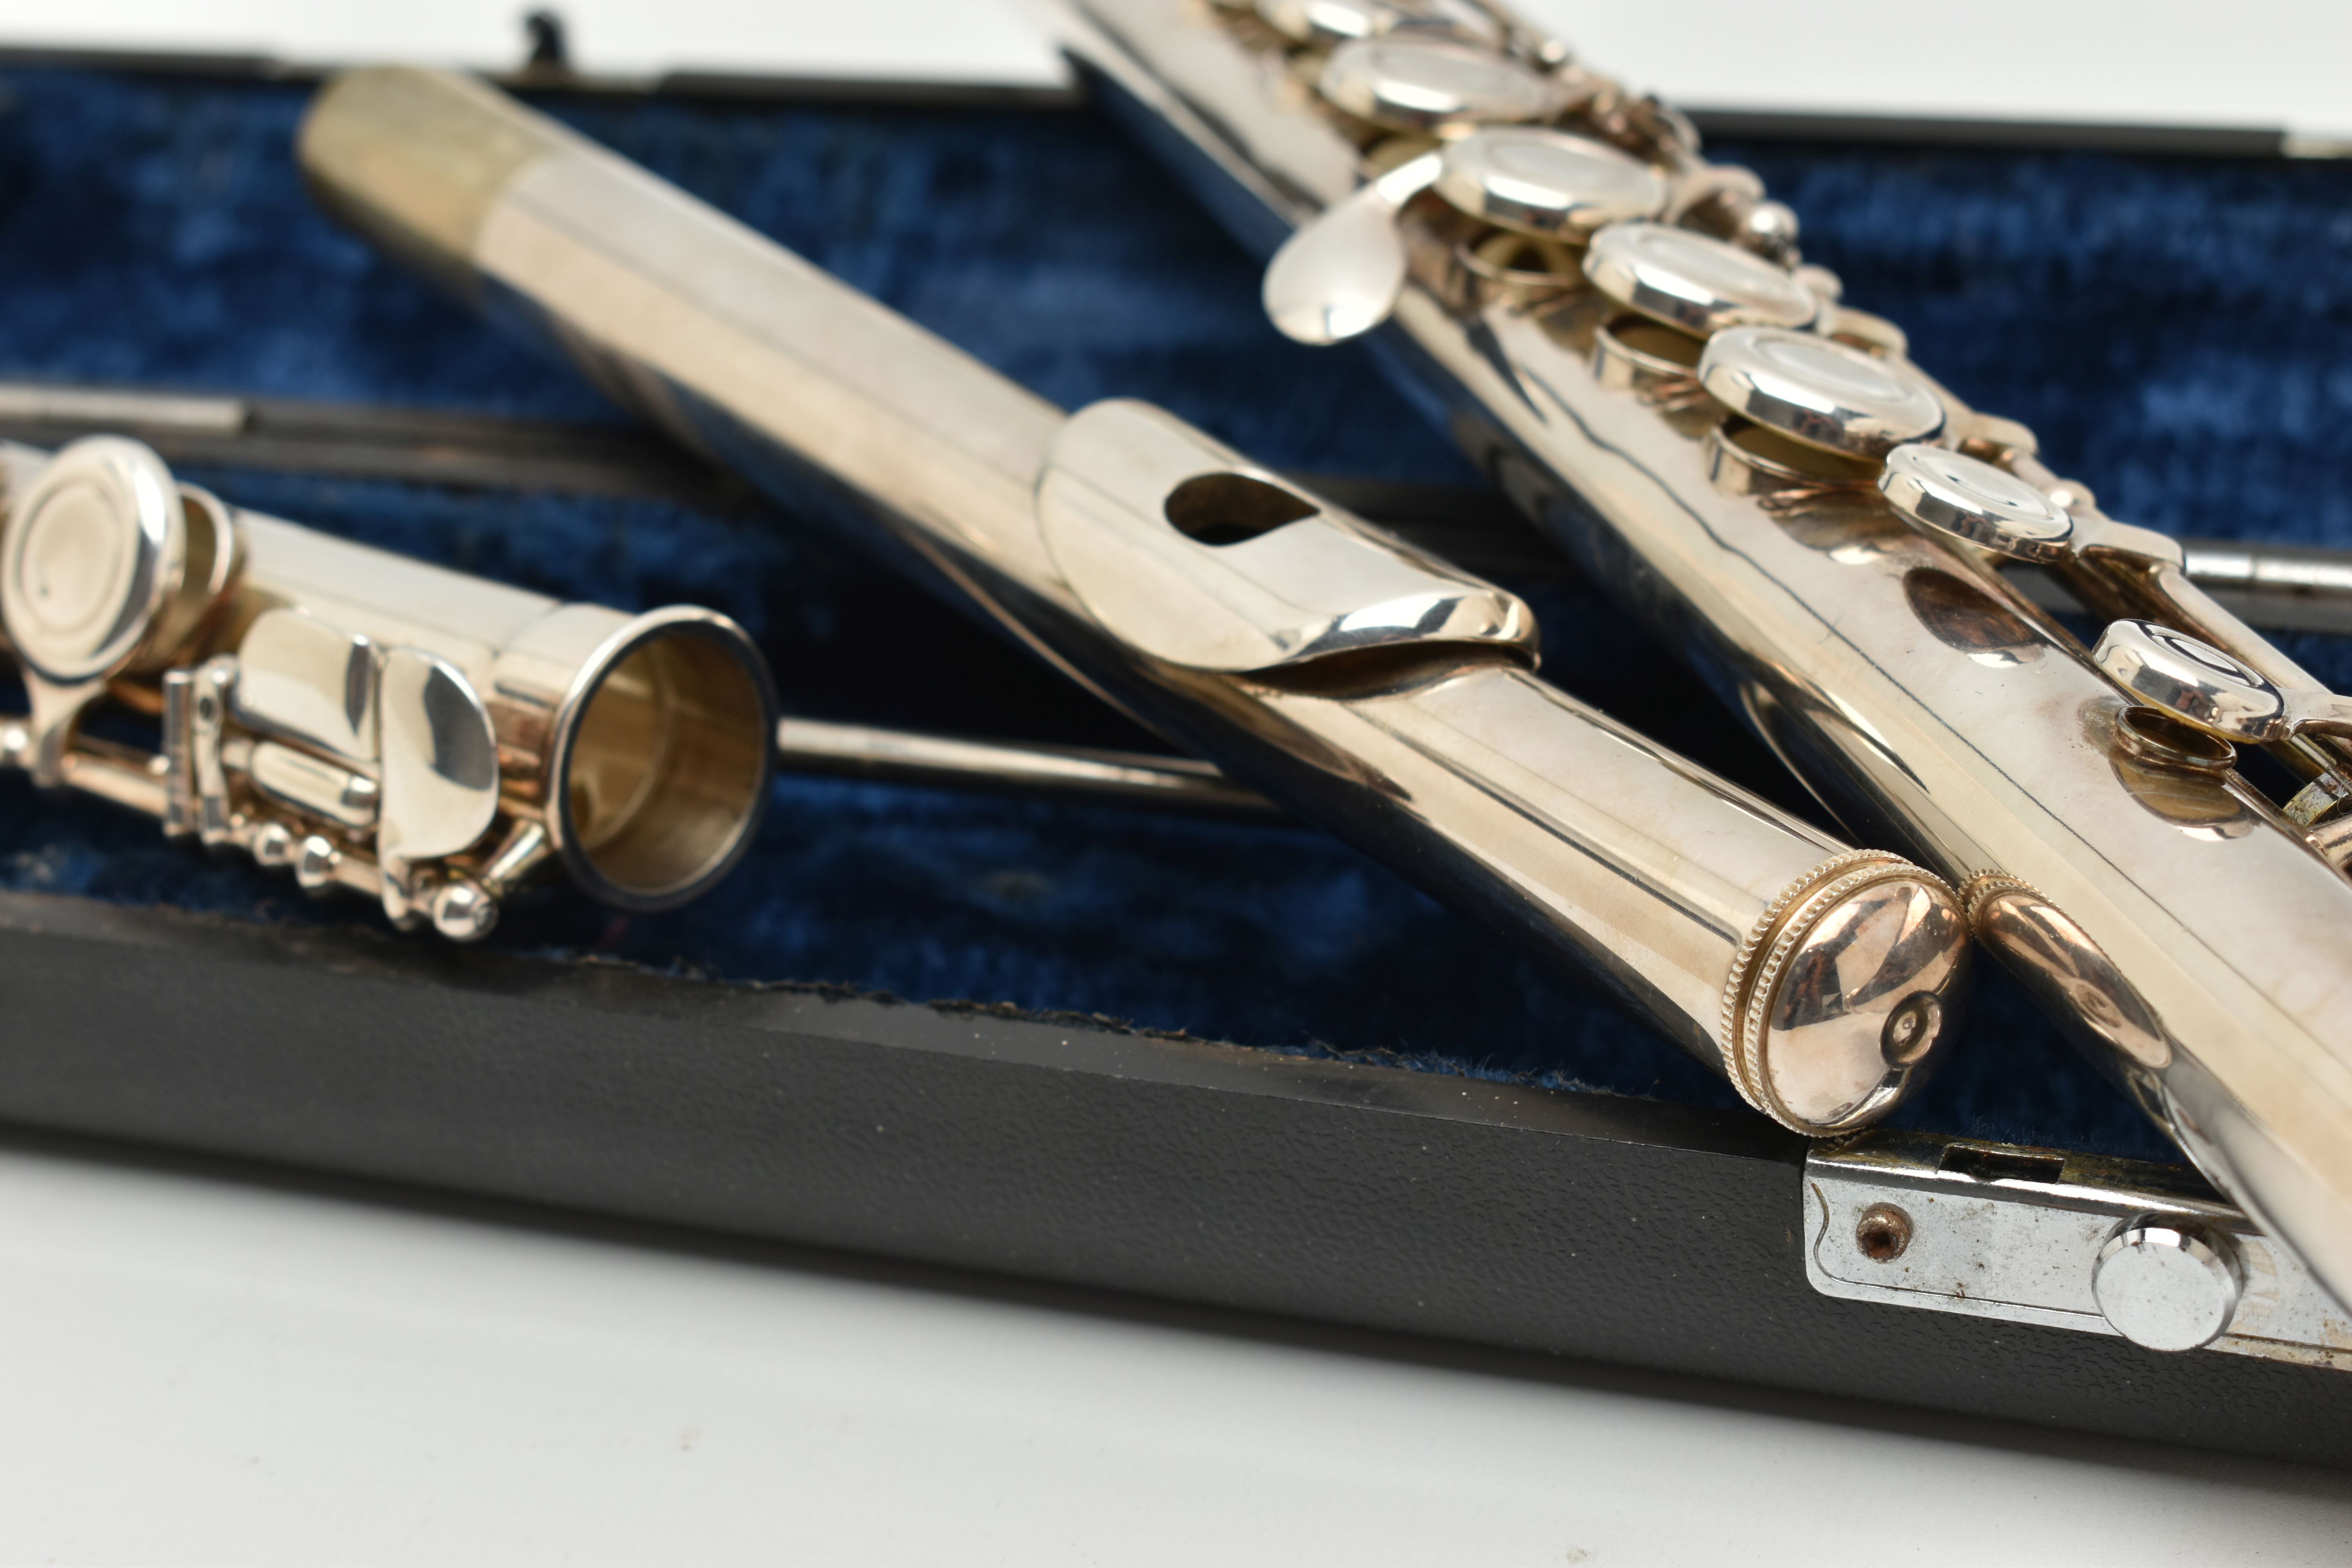 A FRENCH SILVER PLATED FLUTE, BUFFET CAMPON COOPER 228, in good working order - Image 10 of 10